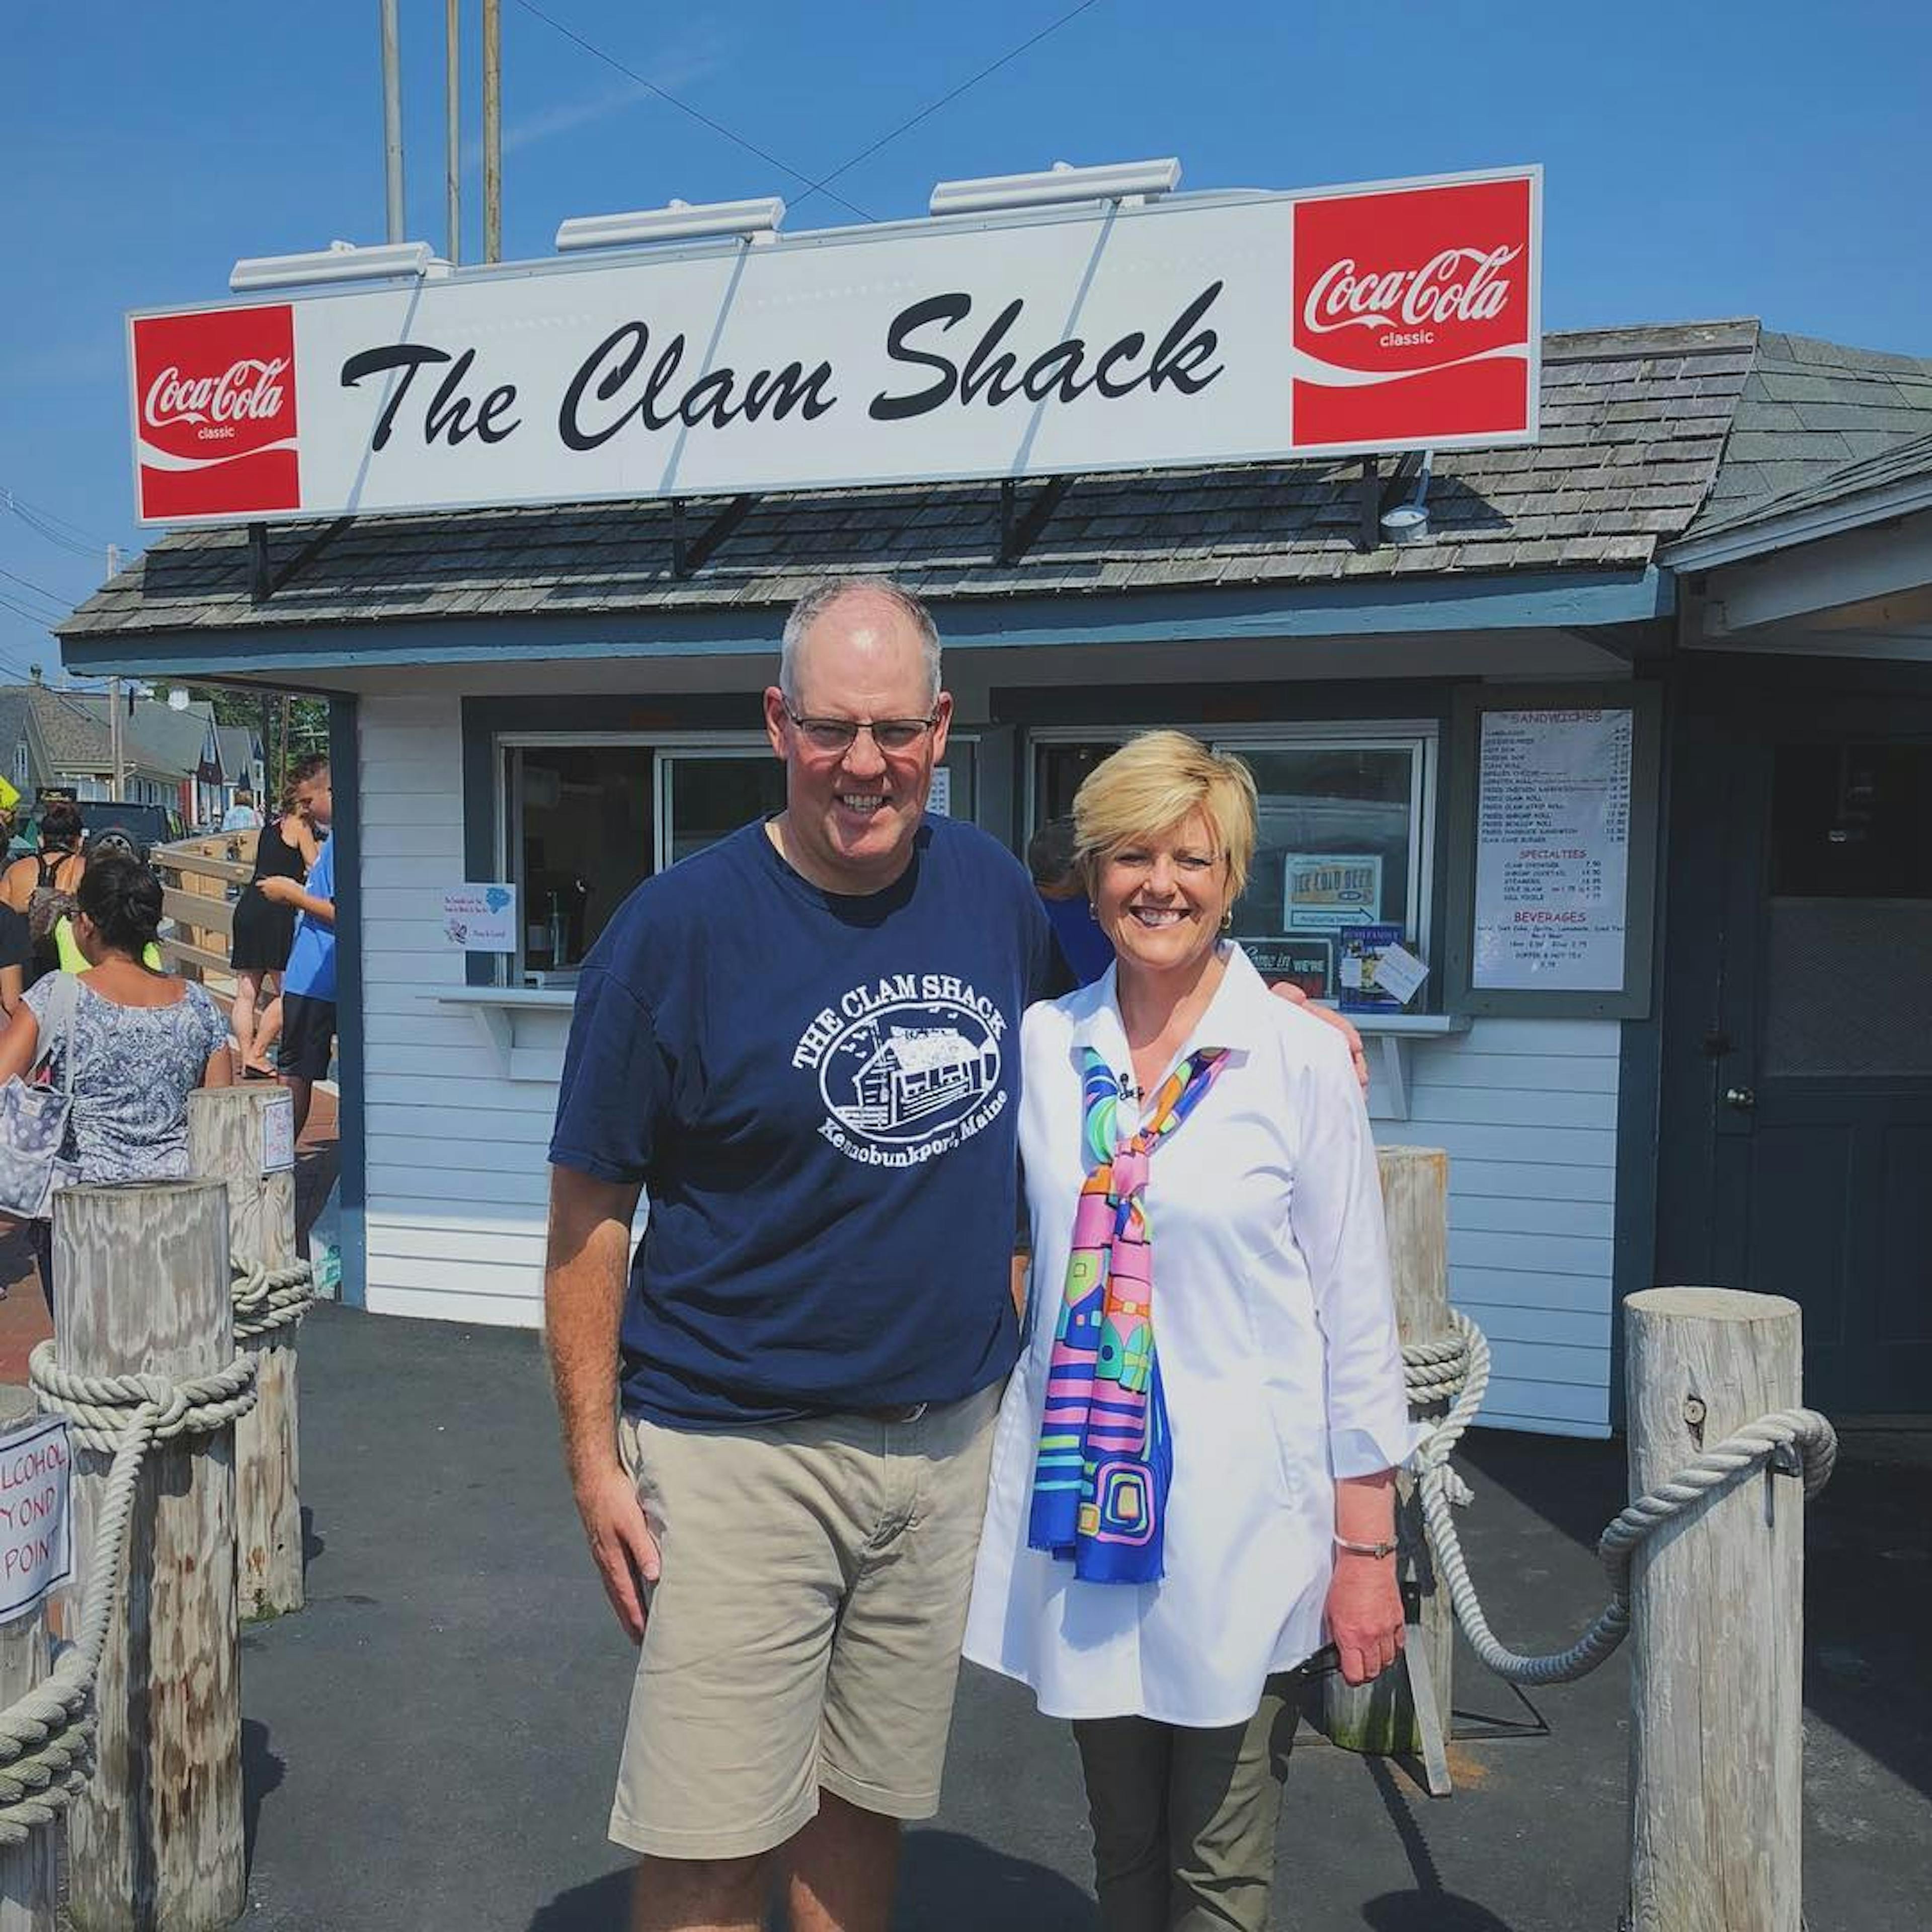 The Clam Shack